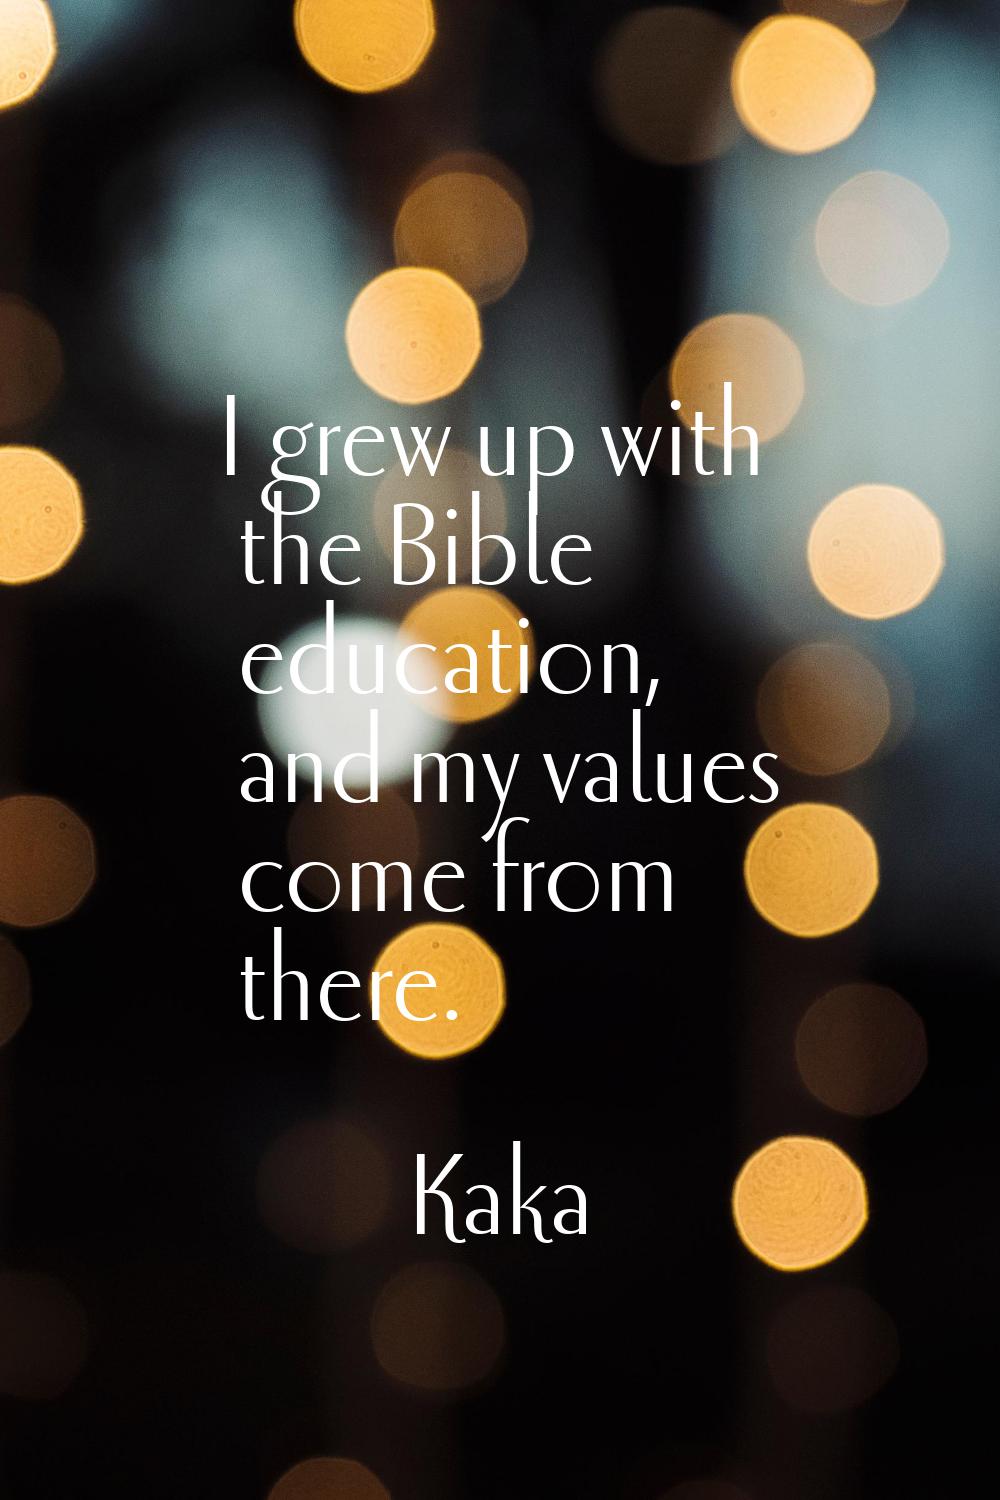 I grew up with the Bible education, and my values come from there.